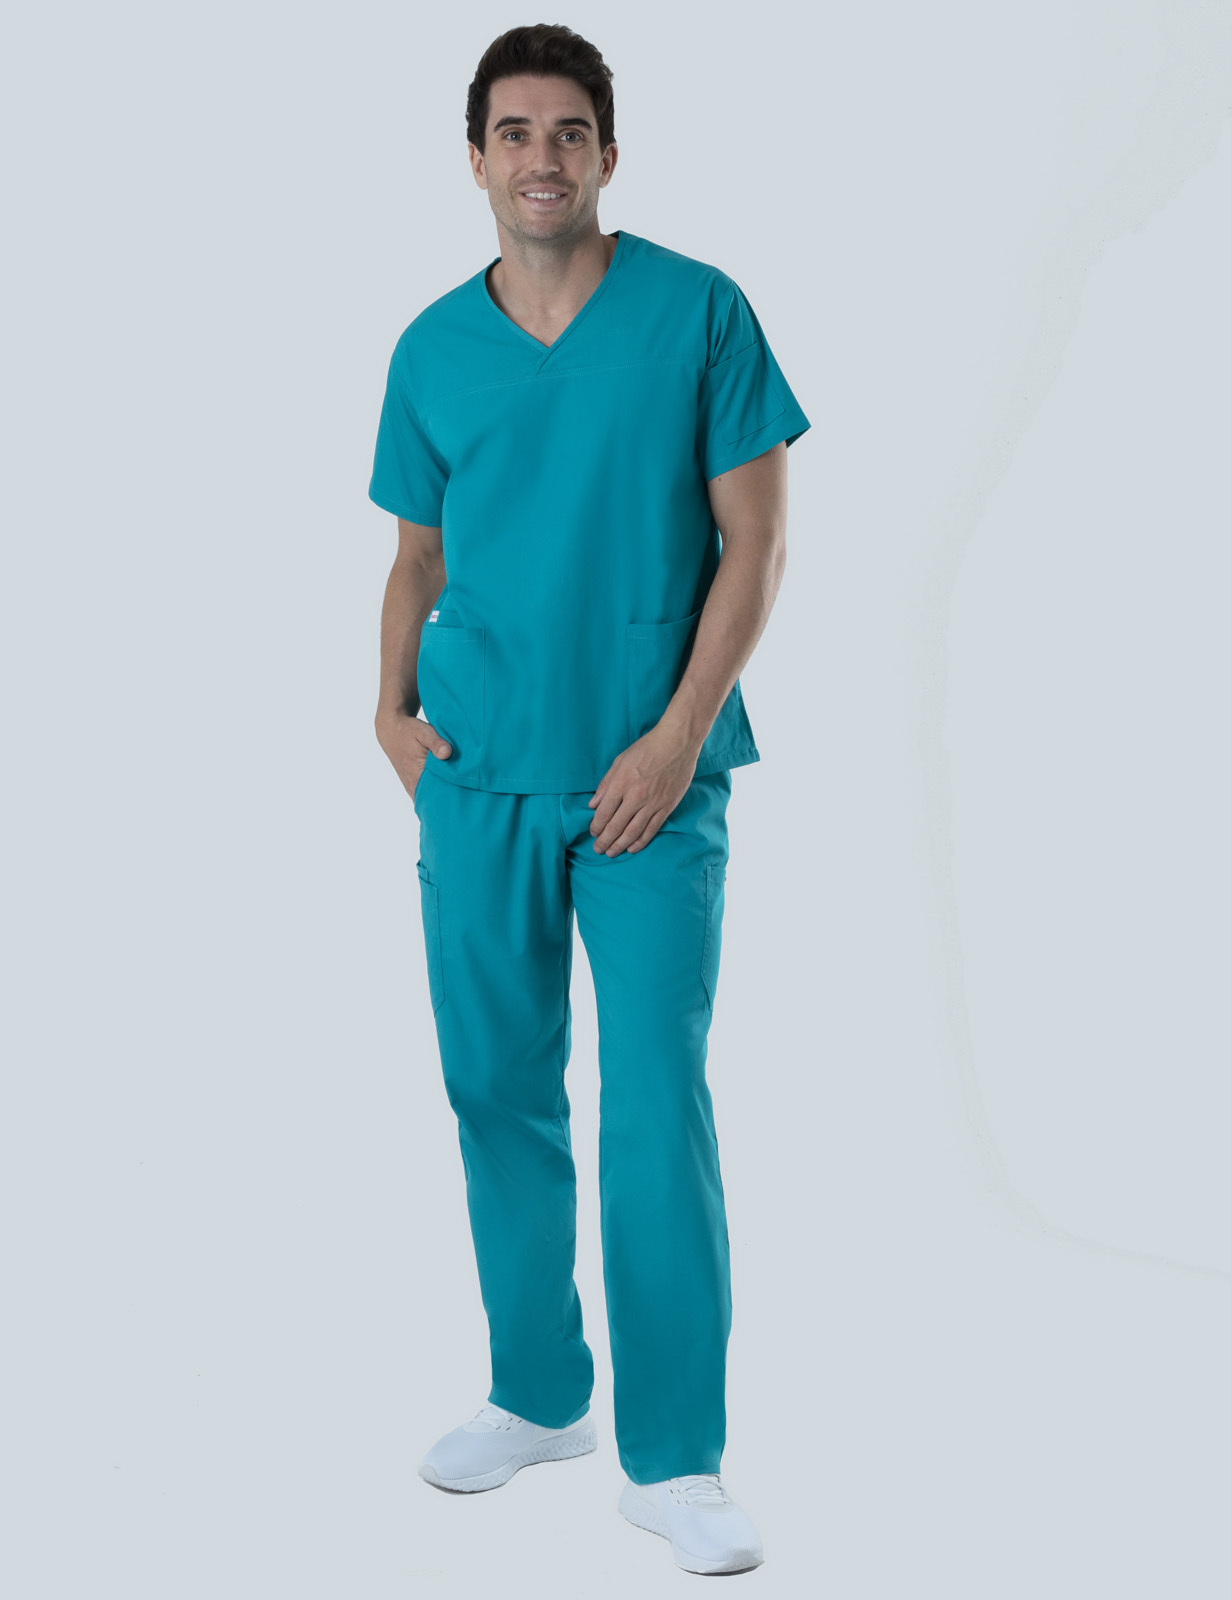 ECT Anaesthetic Technician Uniform Set Bundle (Men's Fit Solid Top and Cargo Pants in Royal + Logos)